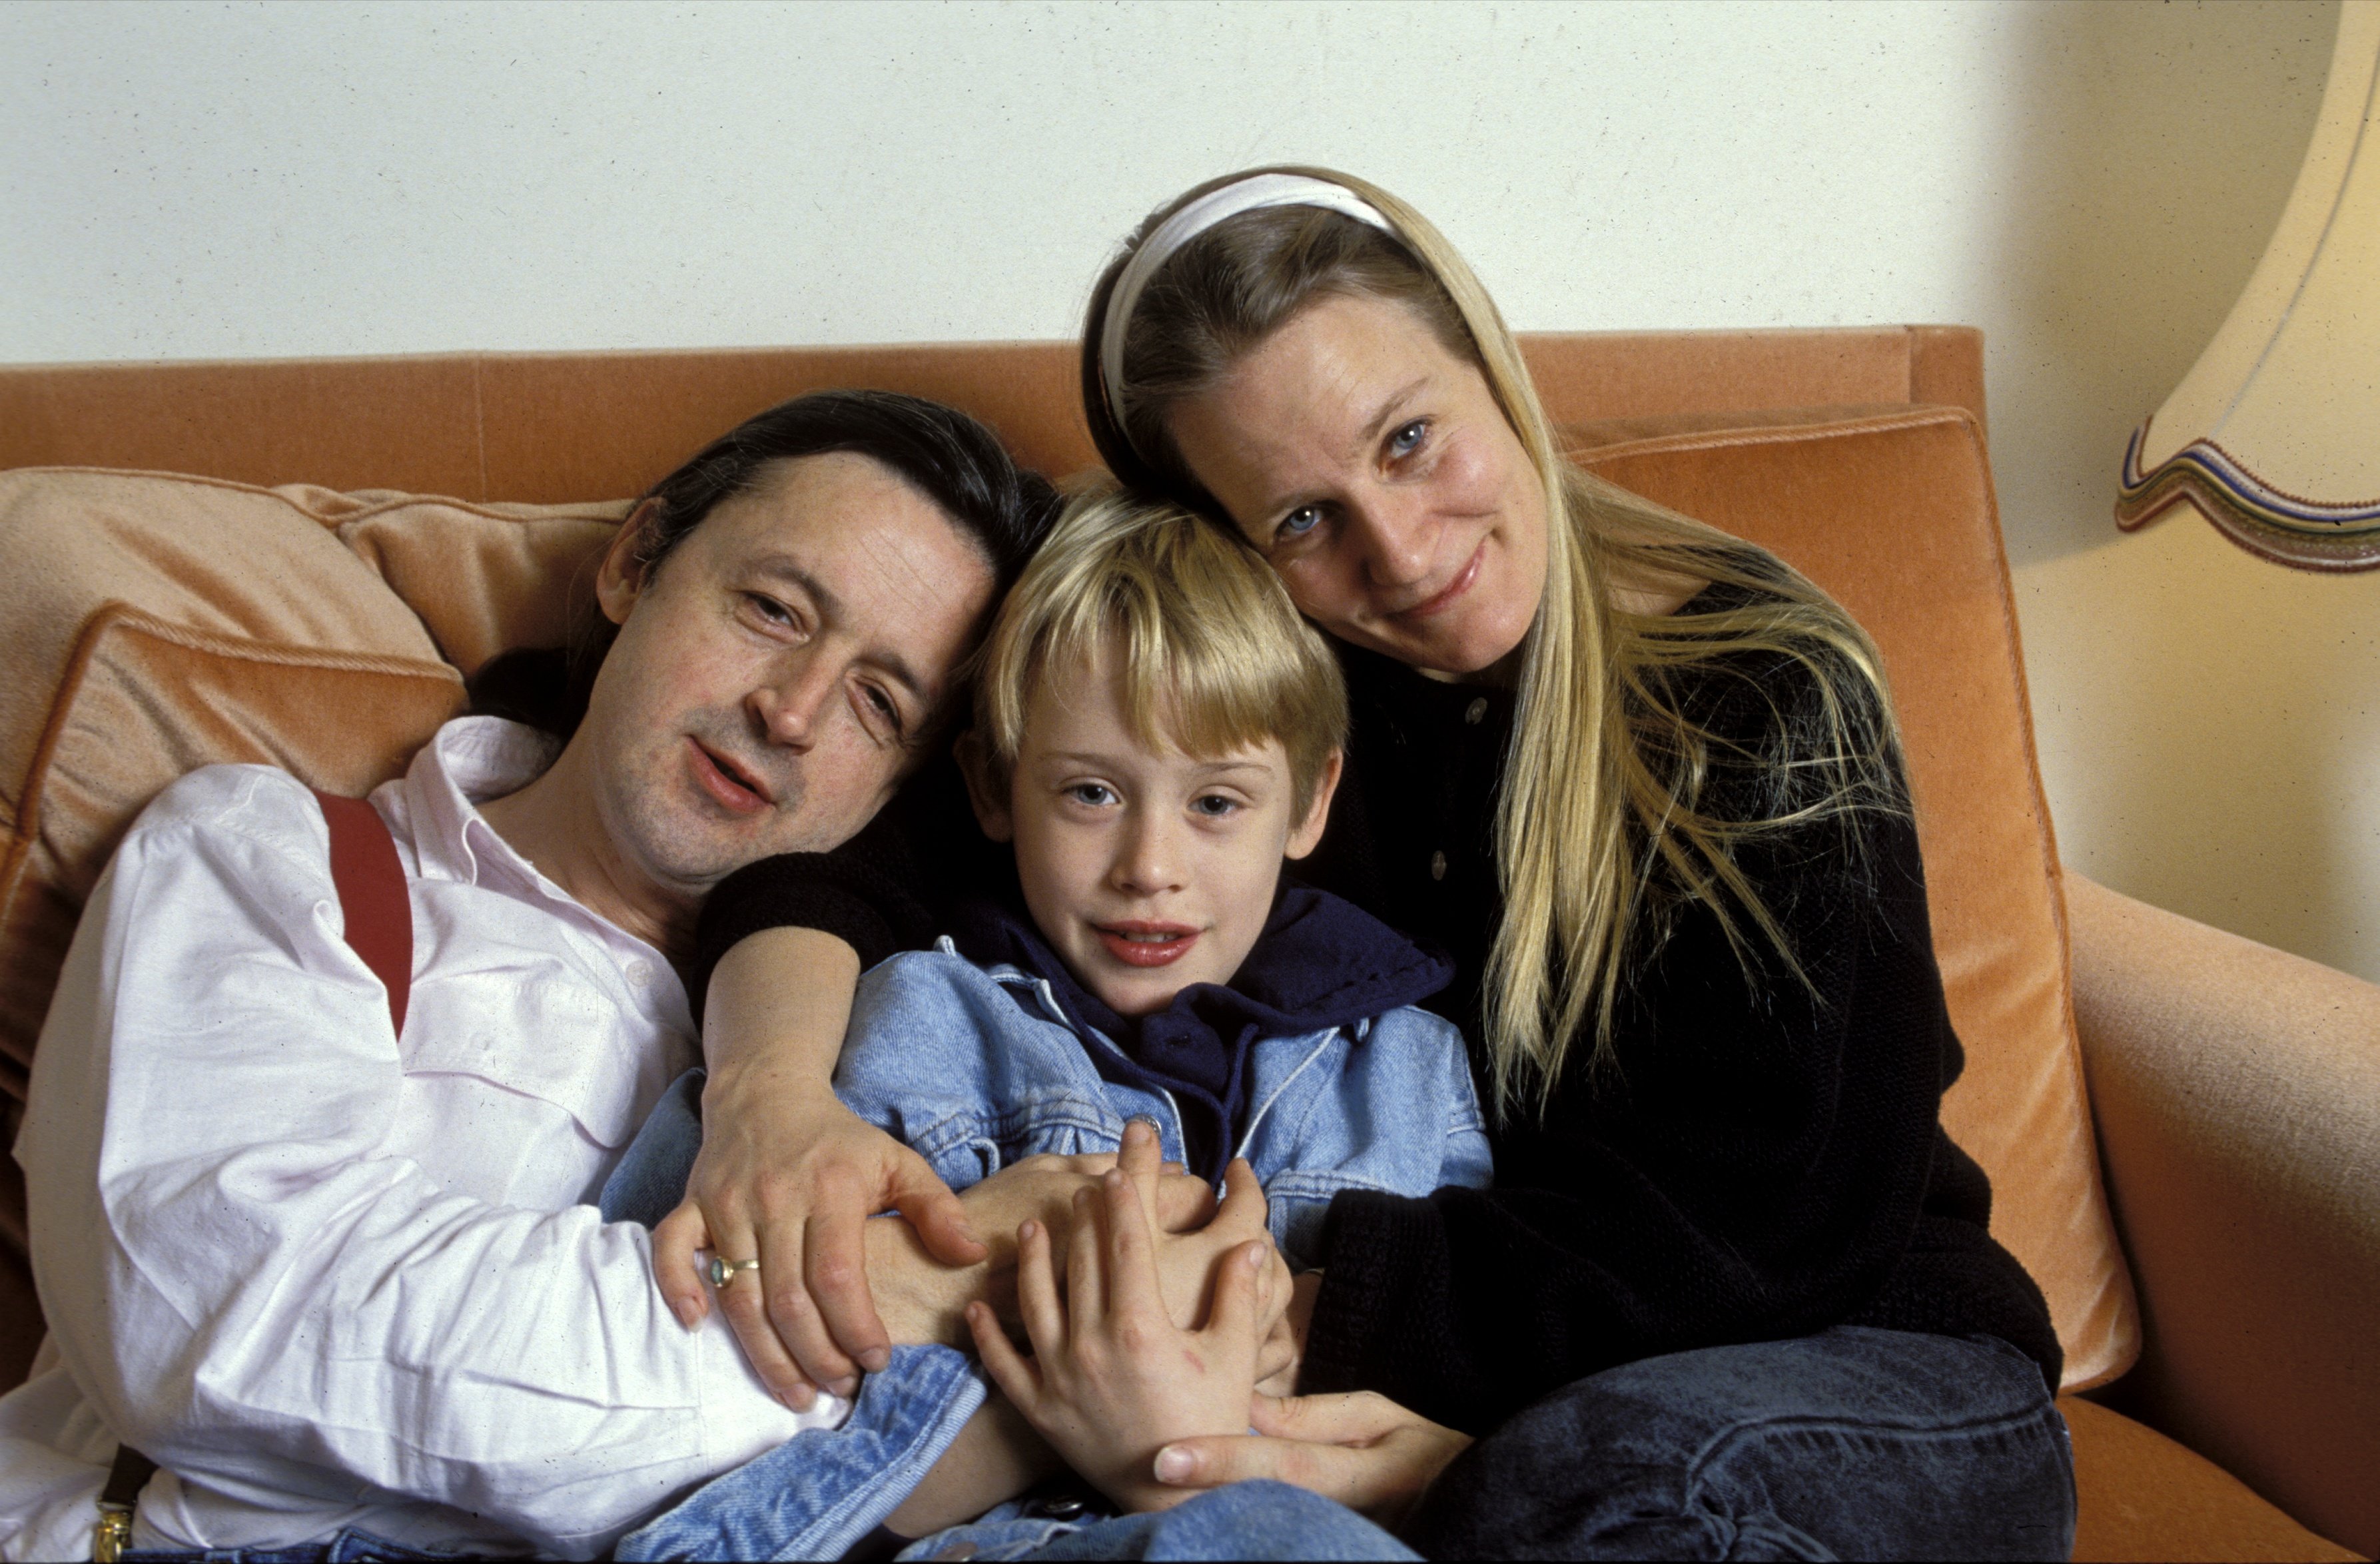 Kit Culkin, Macaulay Culkin, and Patricia Brentrup pose for a photo in their hotel room on December 11, 1990, in Paris, France | Source: Getty Images